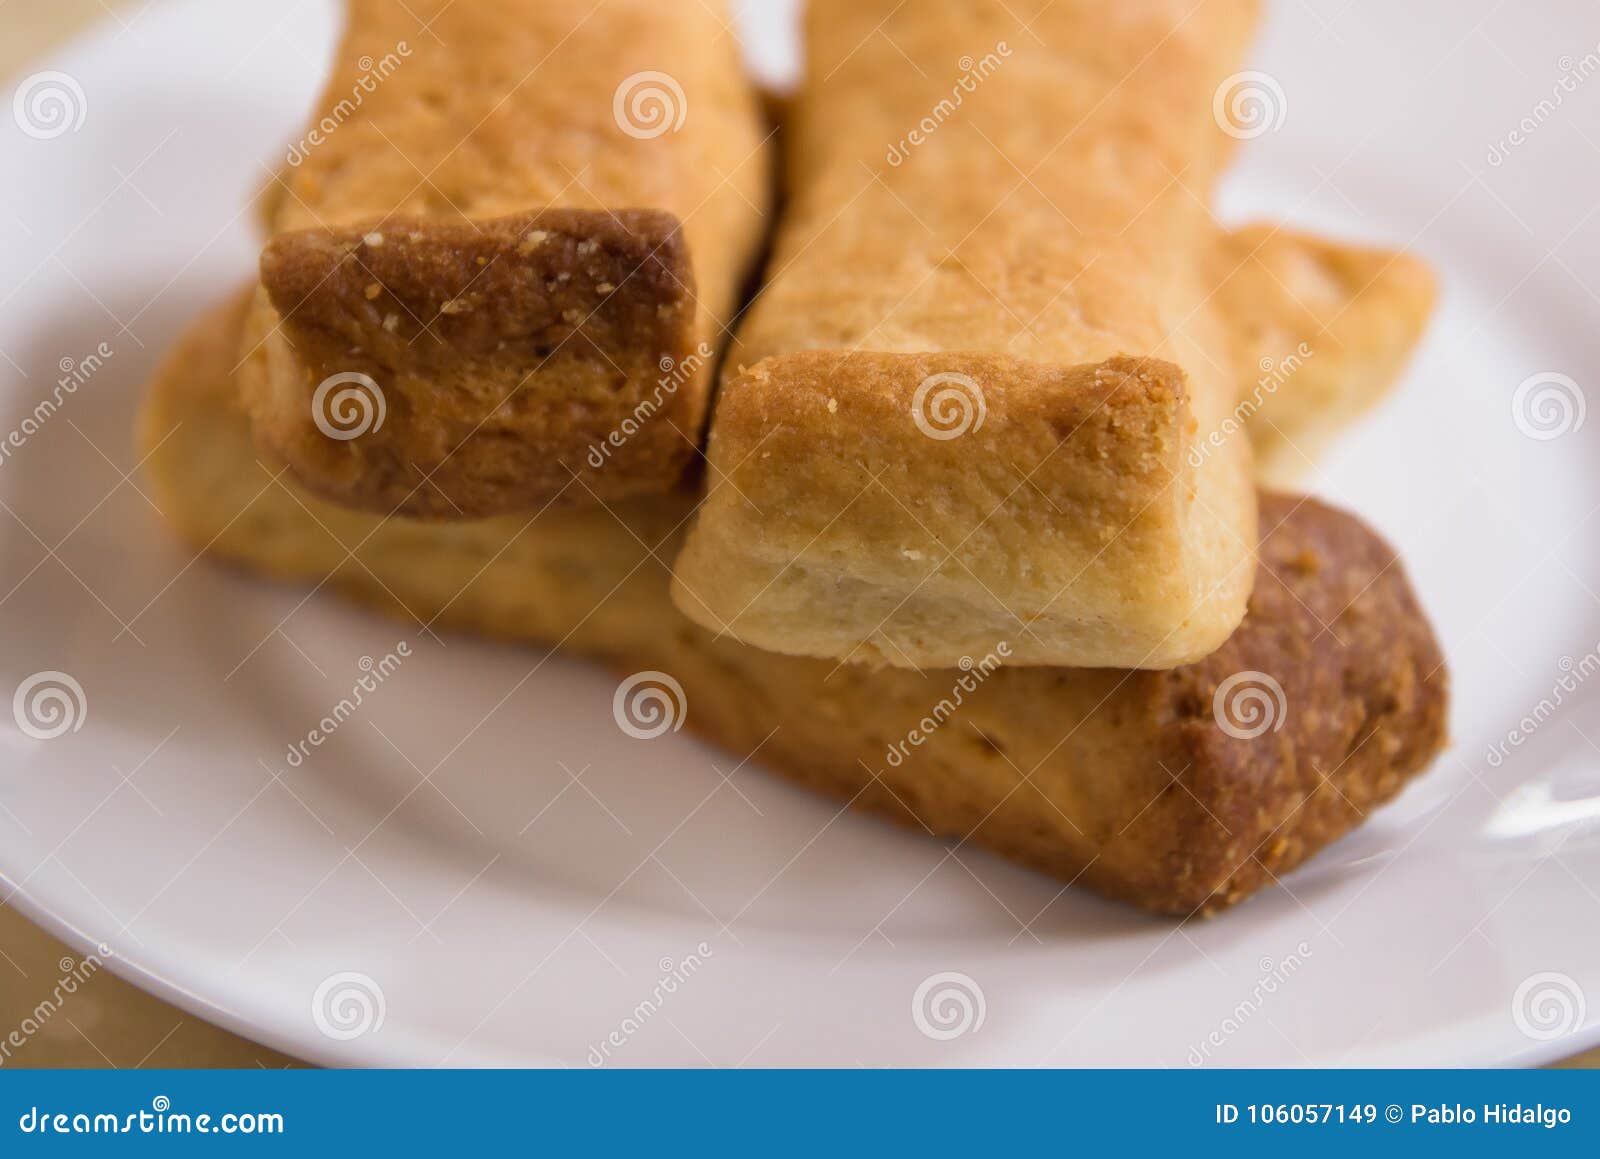 Close Up of a Plate of Bisquit Typical Andean Food Region, Sponge ...